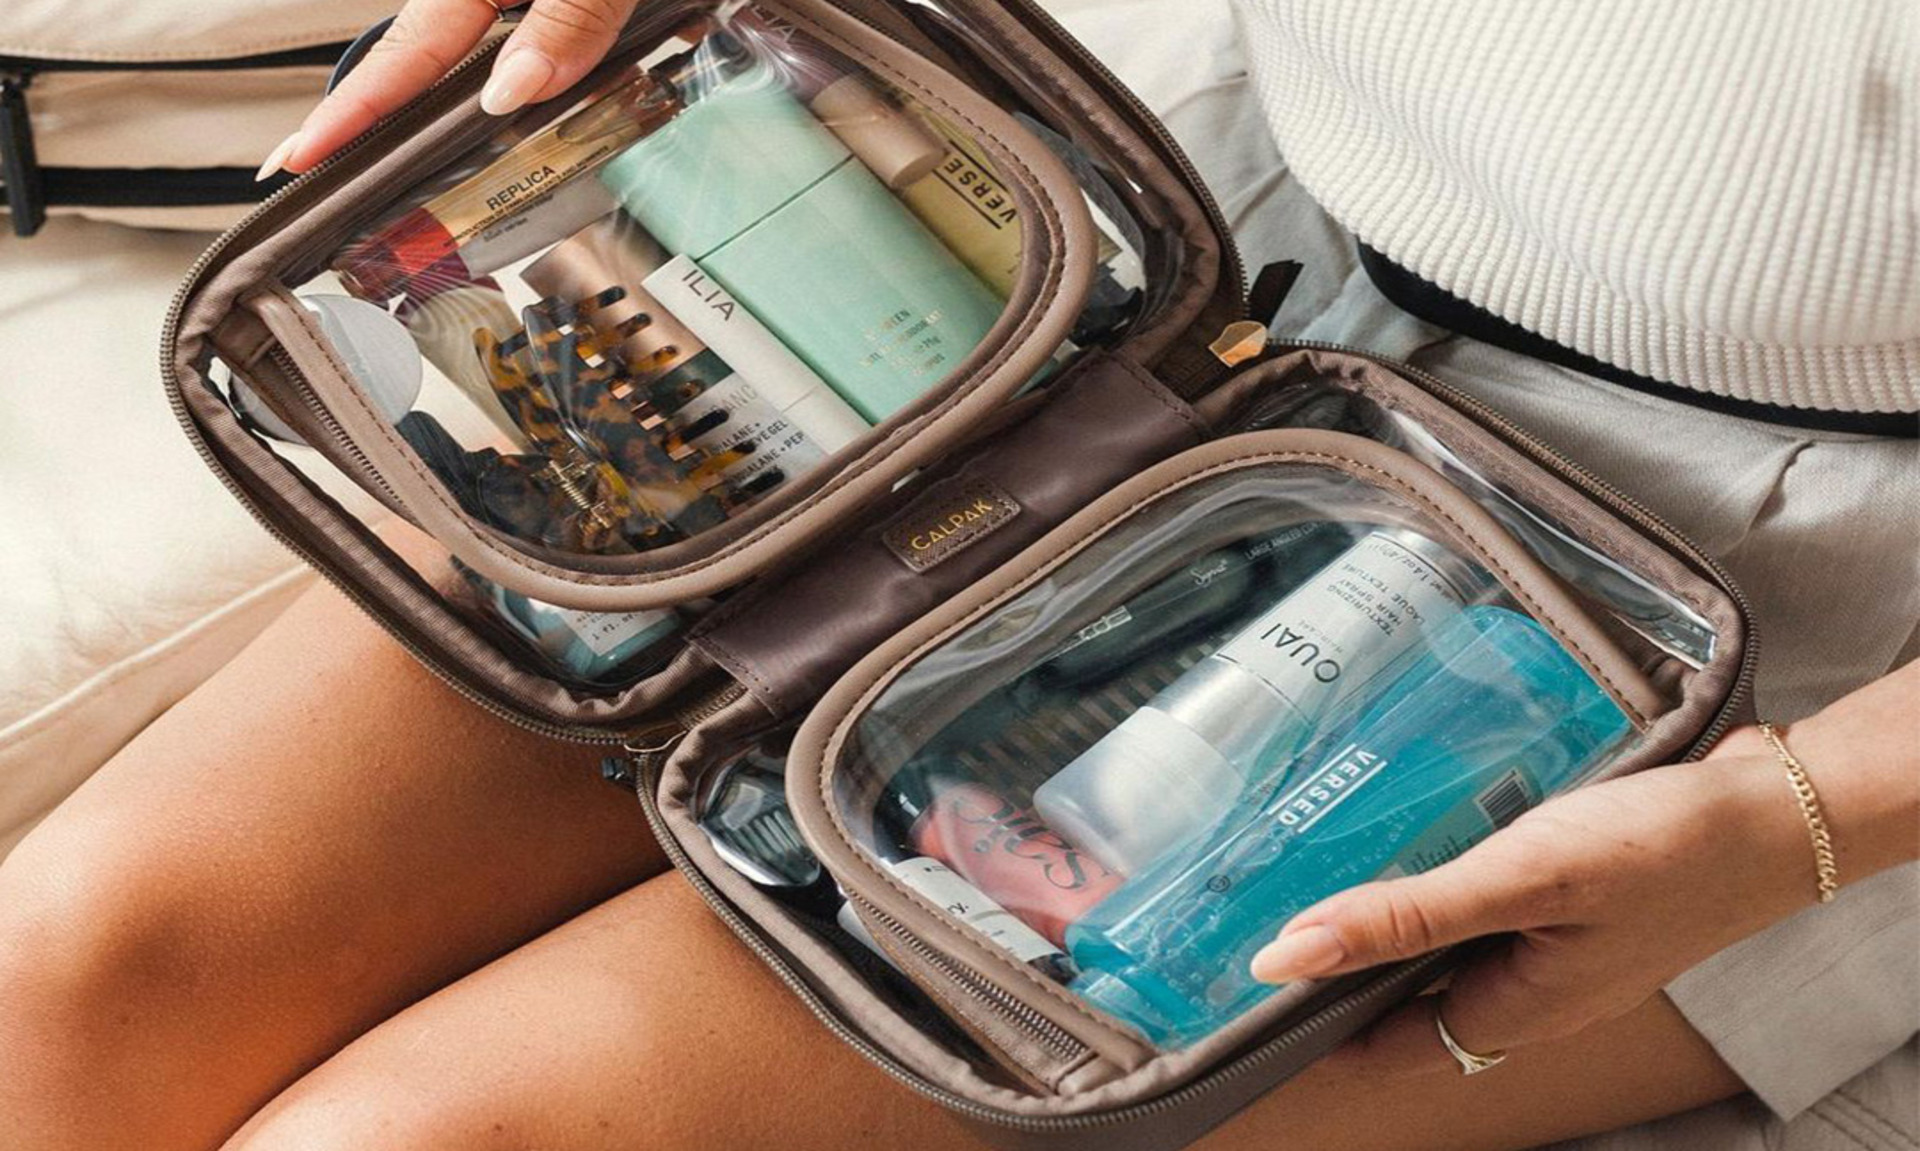 Travel-Friendly Beauty Essentials: Packing Tips and Must-Have Products